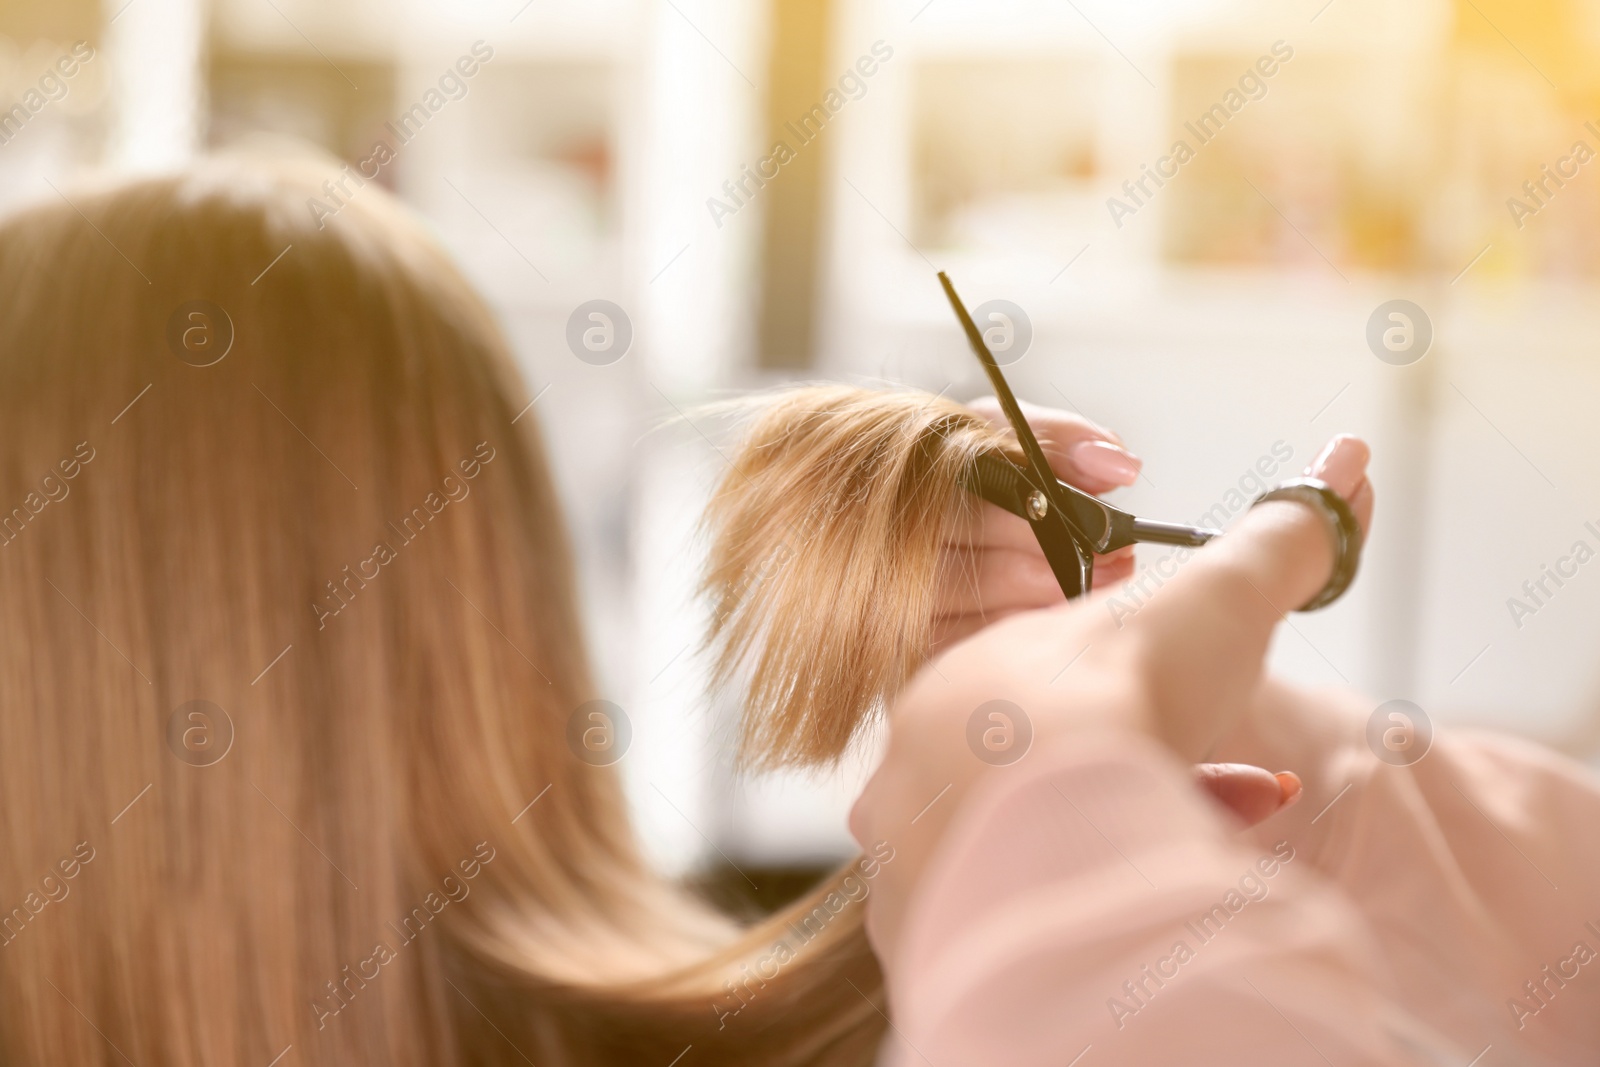 Image of Hairdresser making stylish haircut with professional scissors in salon, closeup